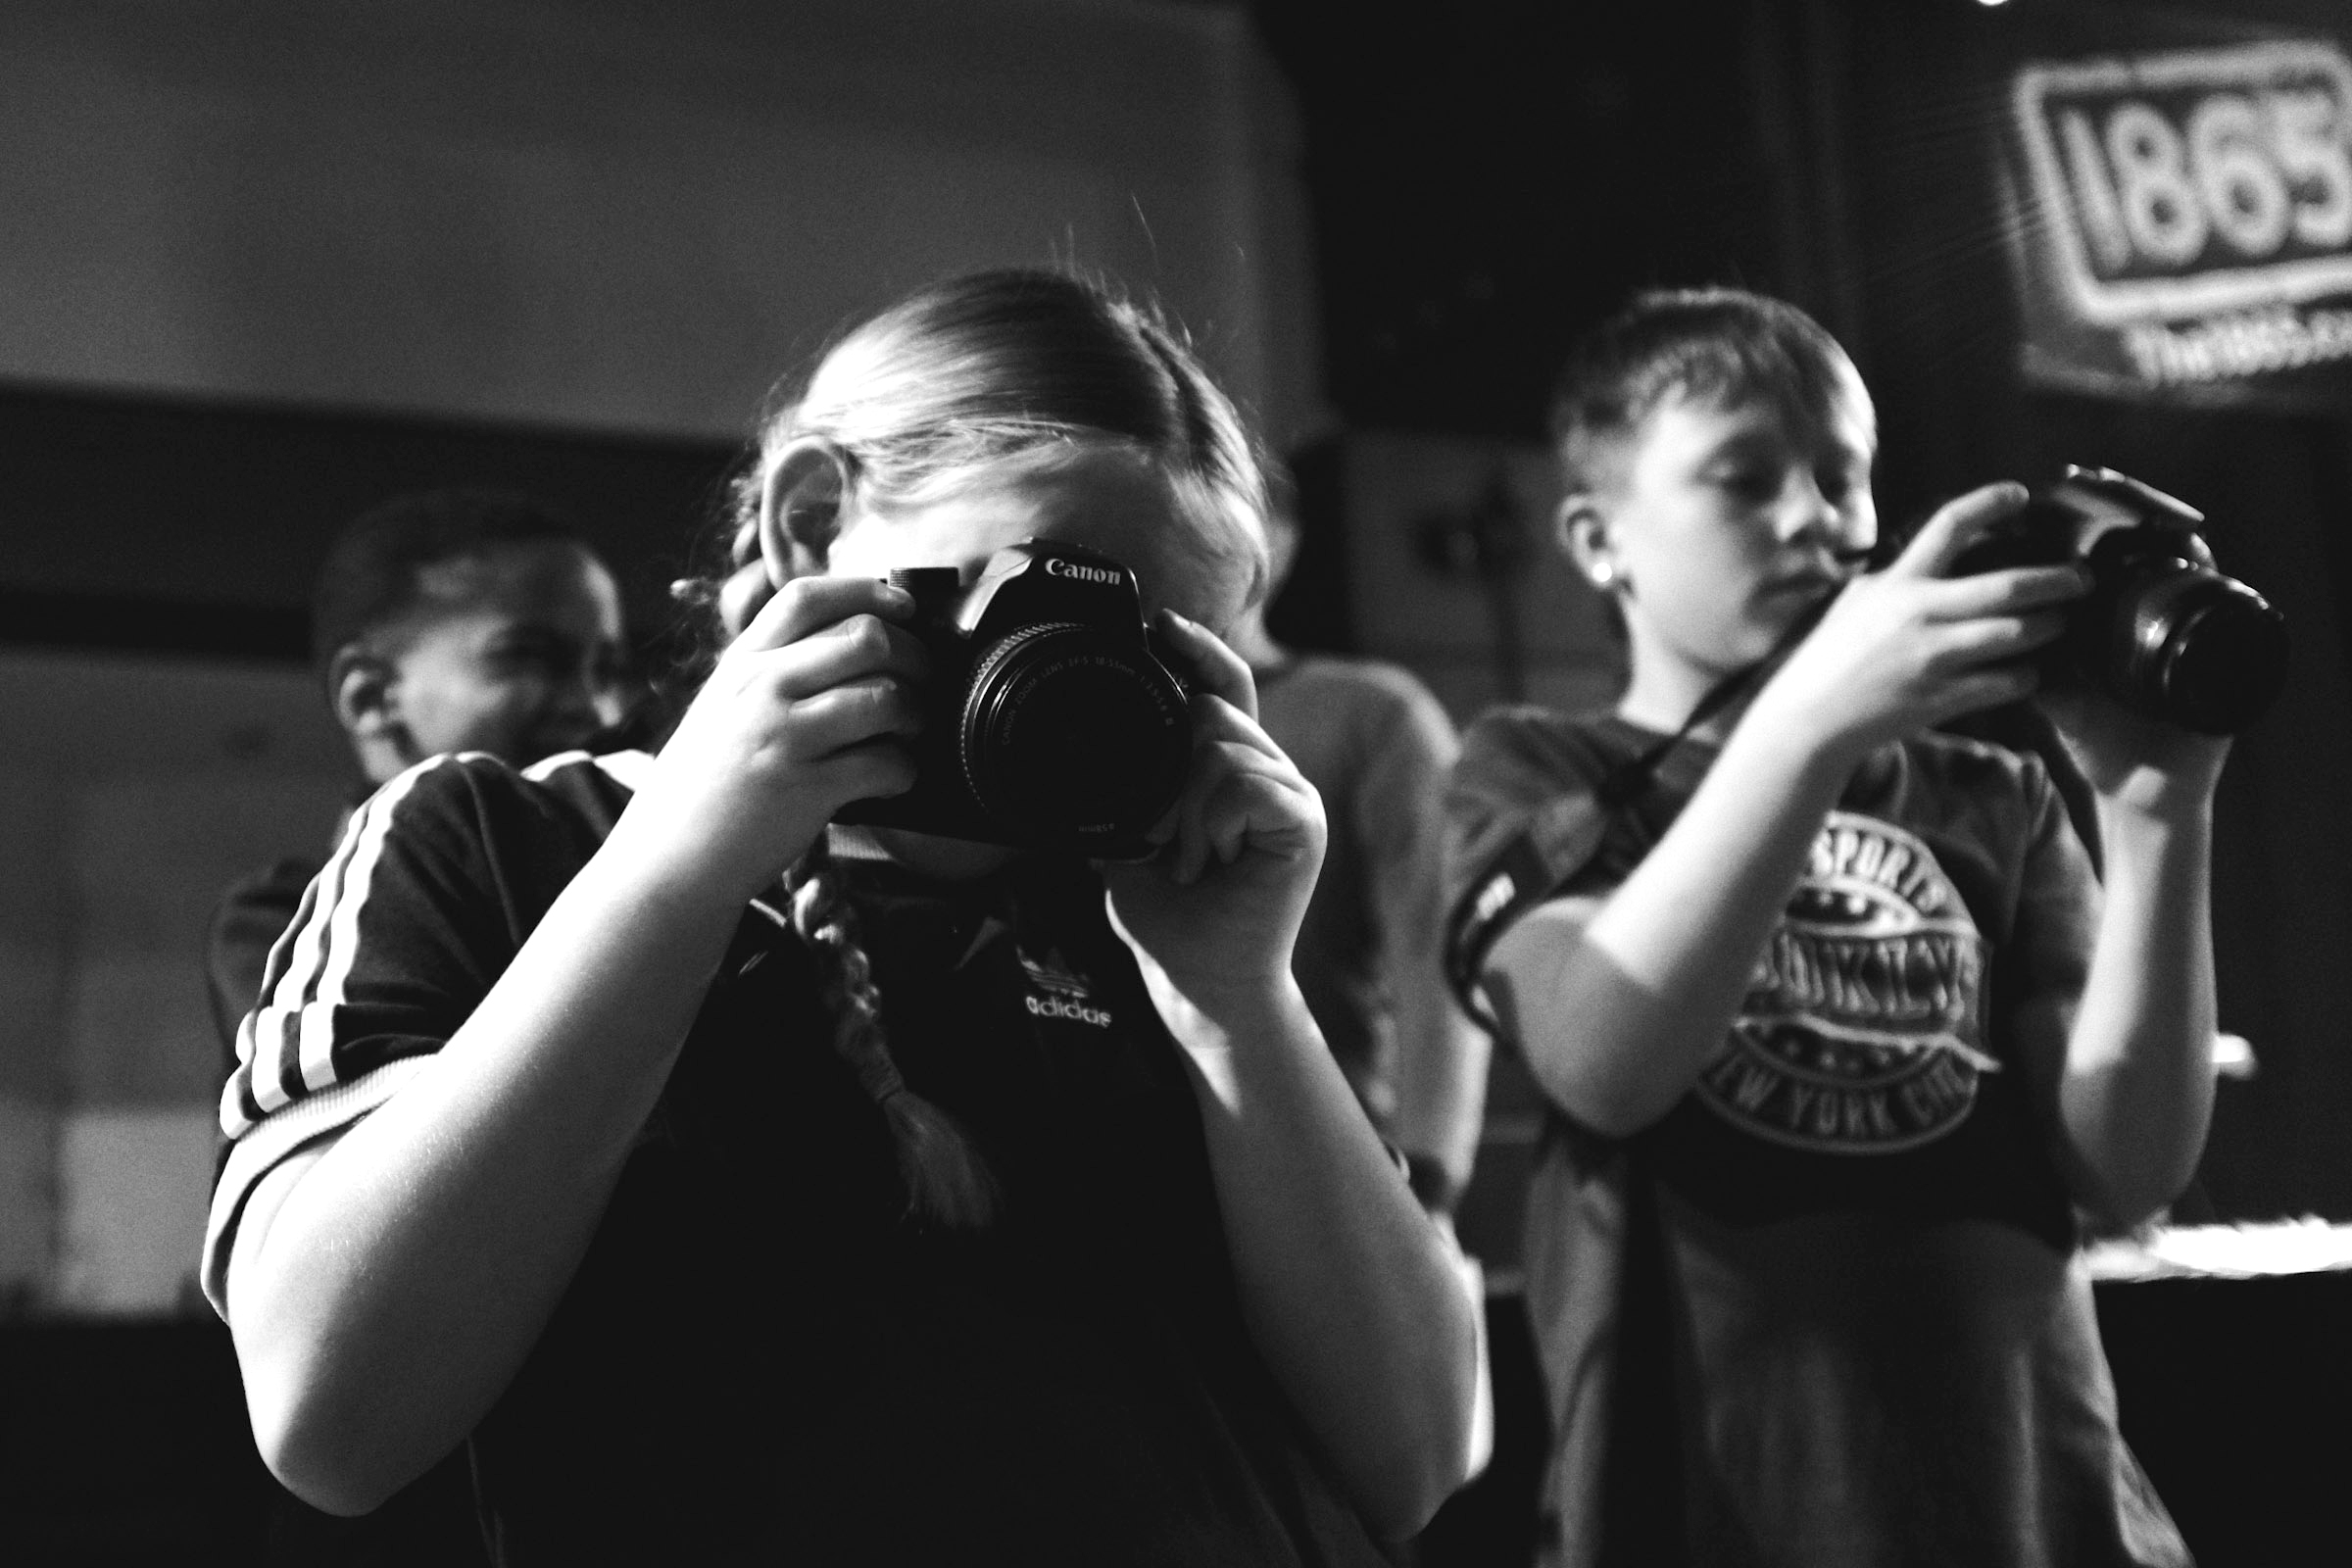 A young person aims her camera at the photographer